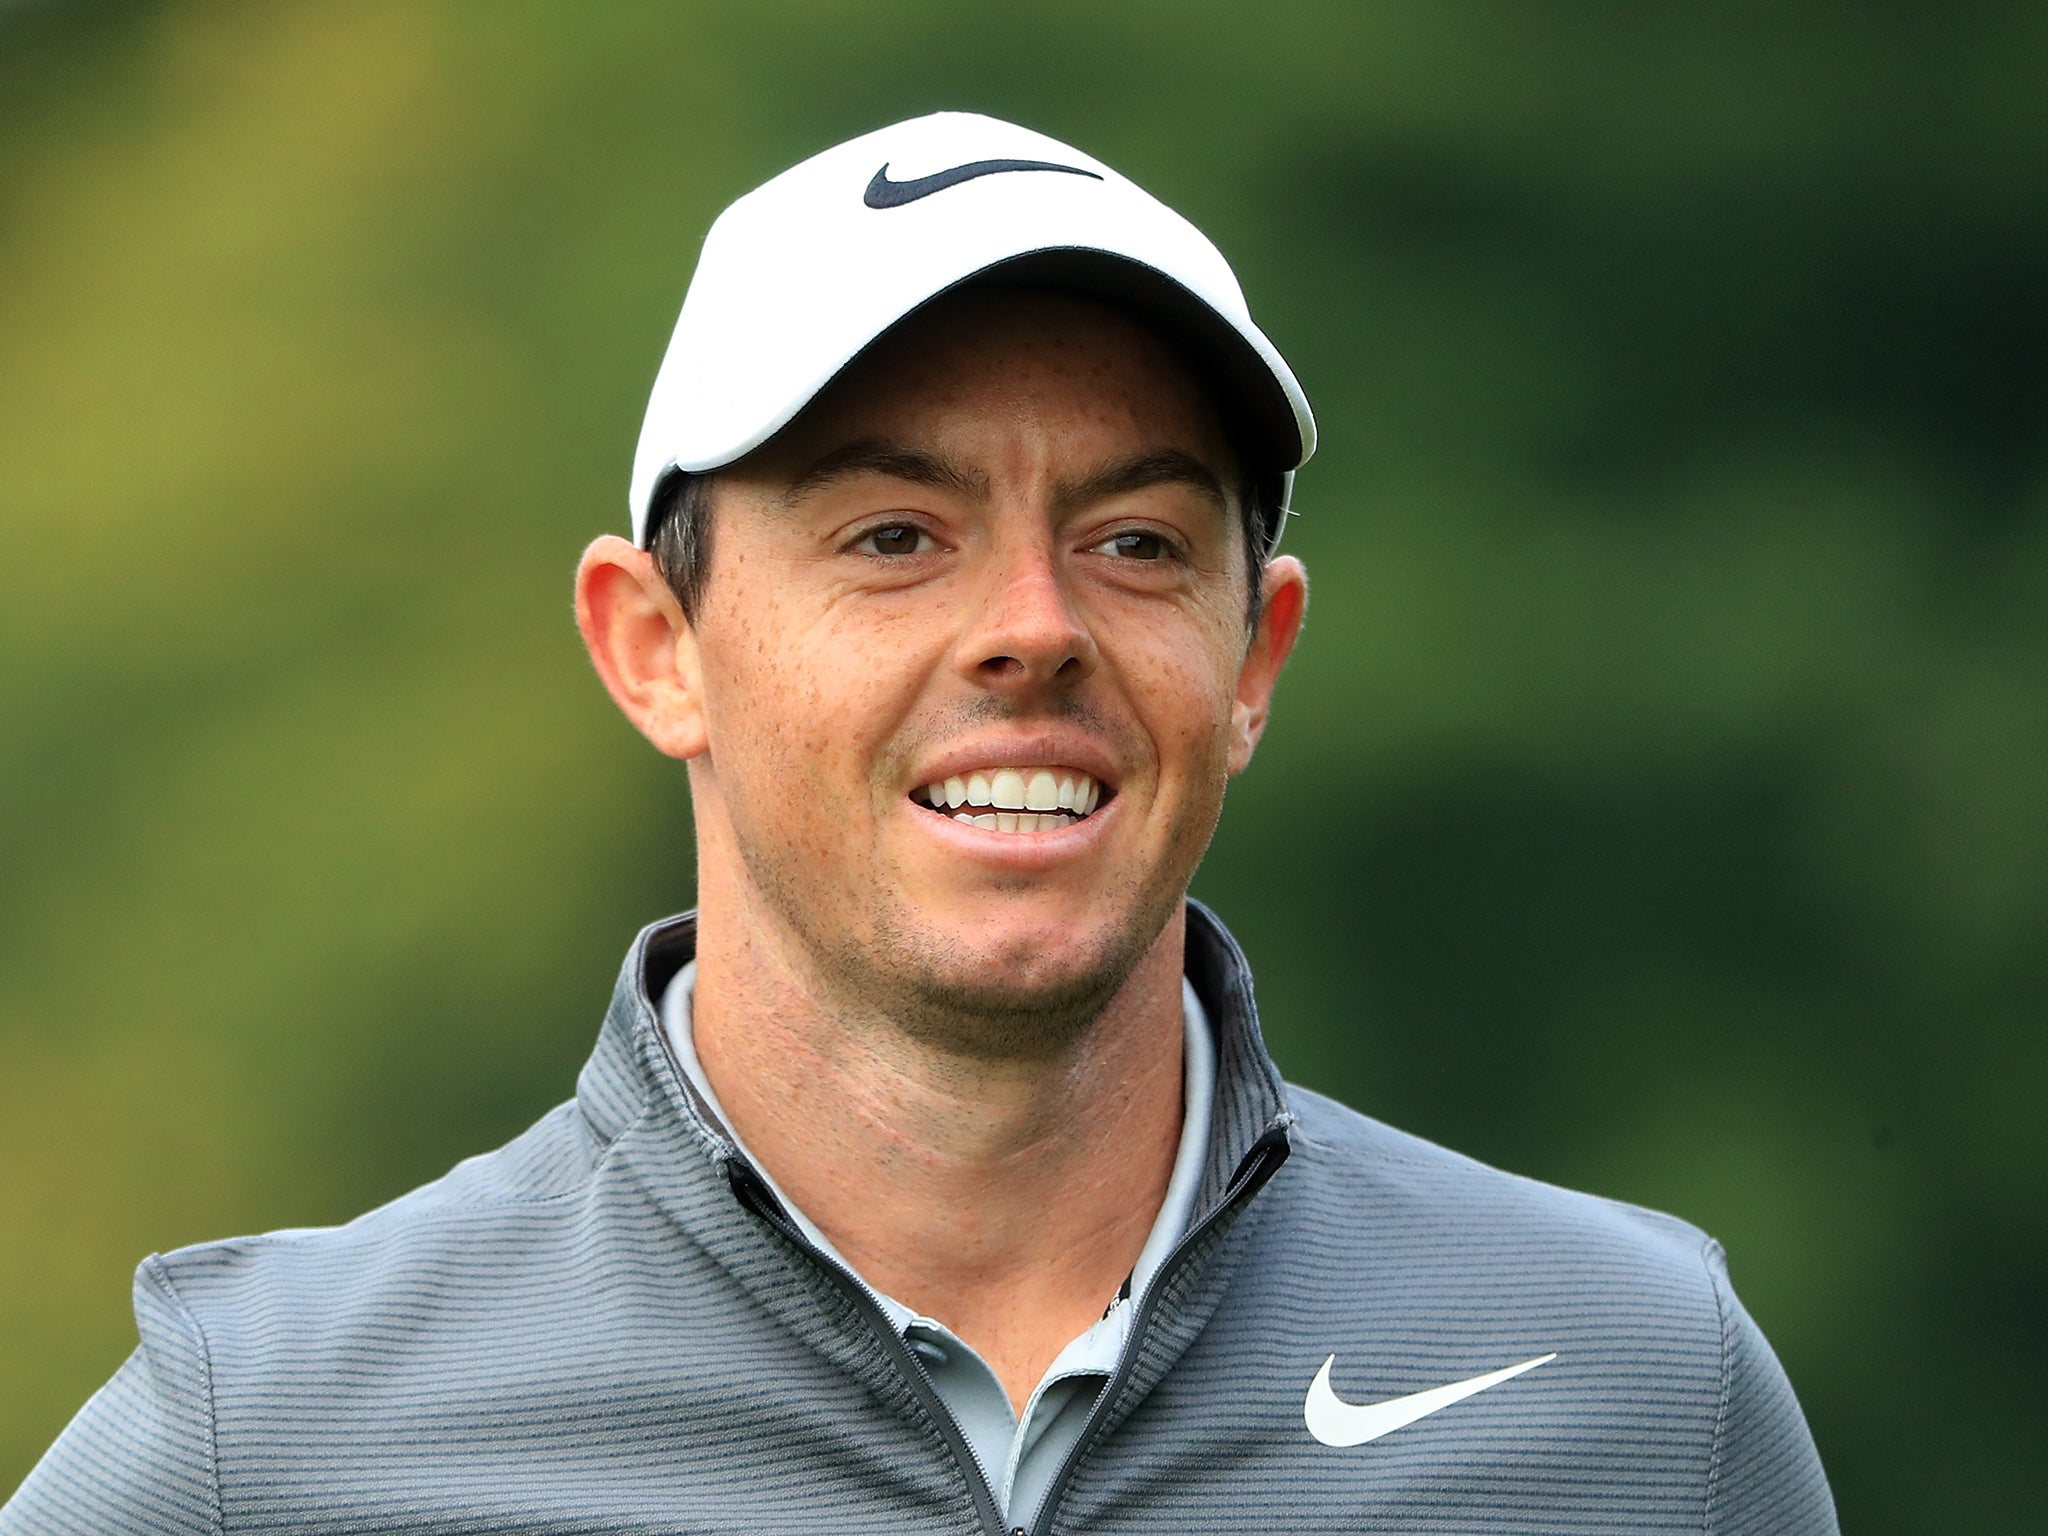 Rory McIlroy needed to play in the British Masters to guarantee European Tour membership retention